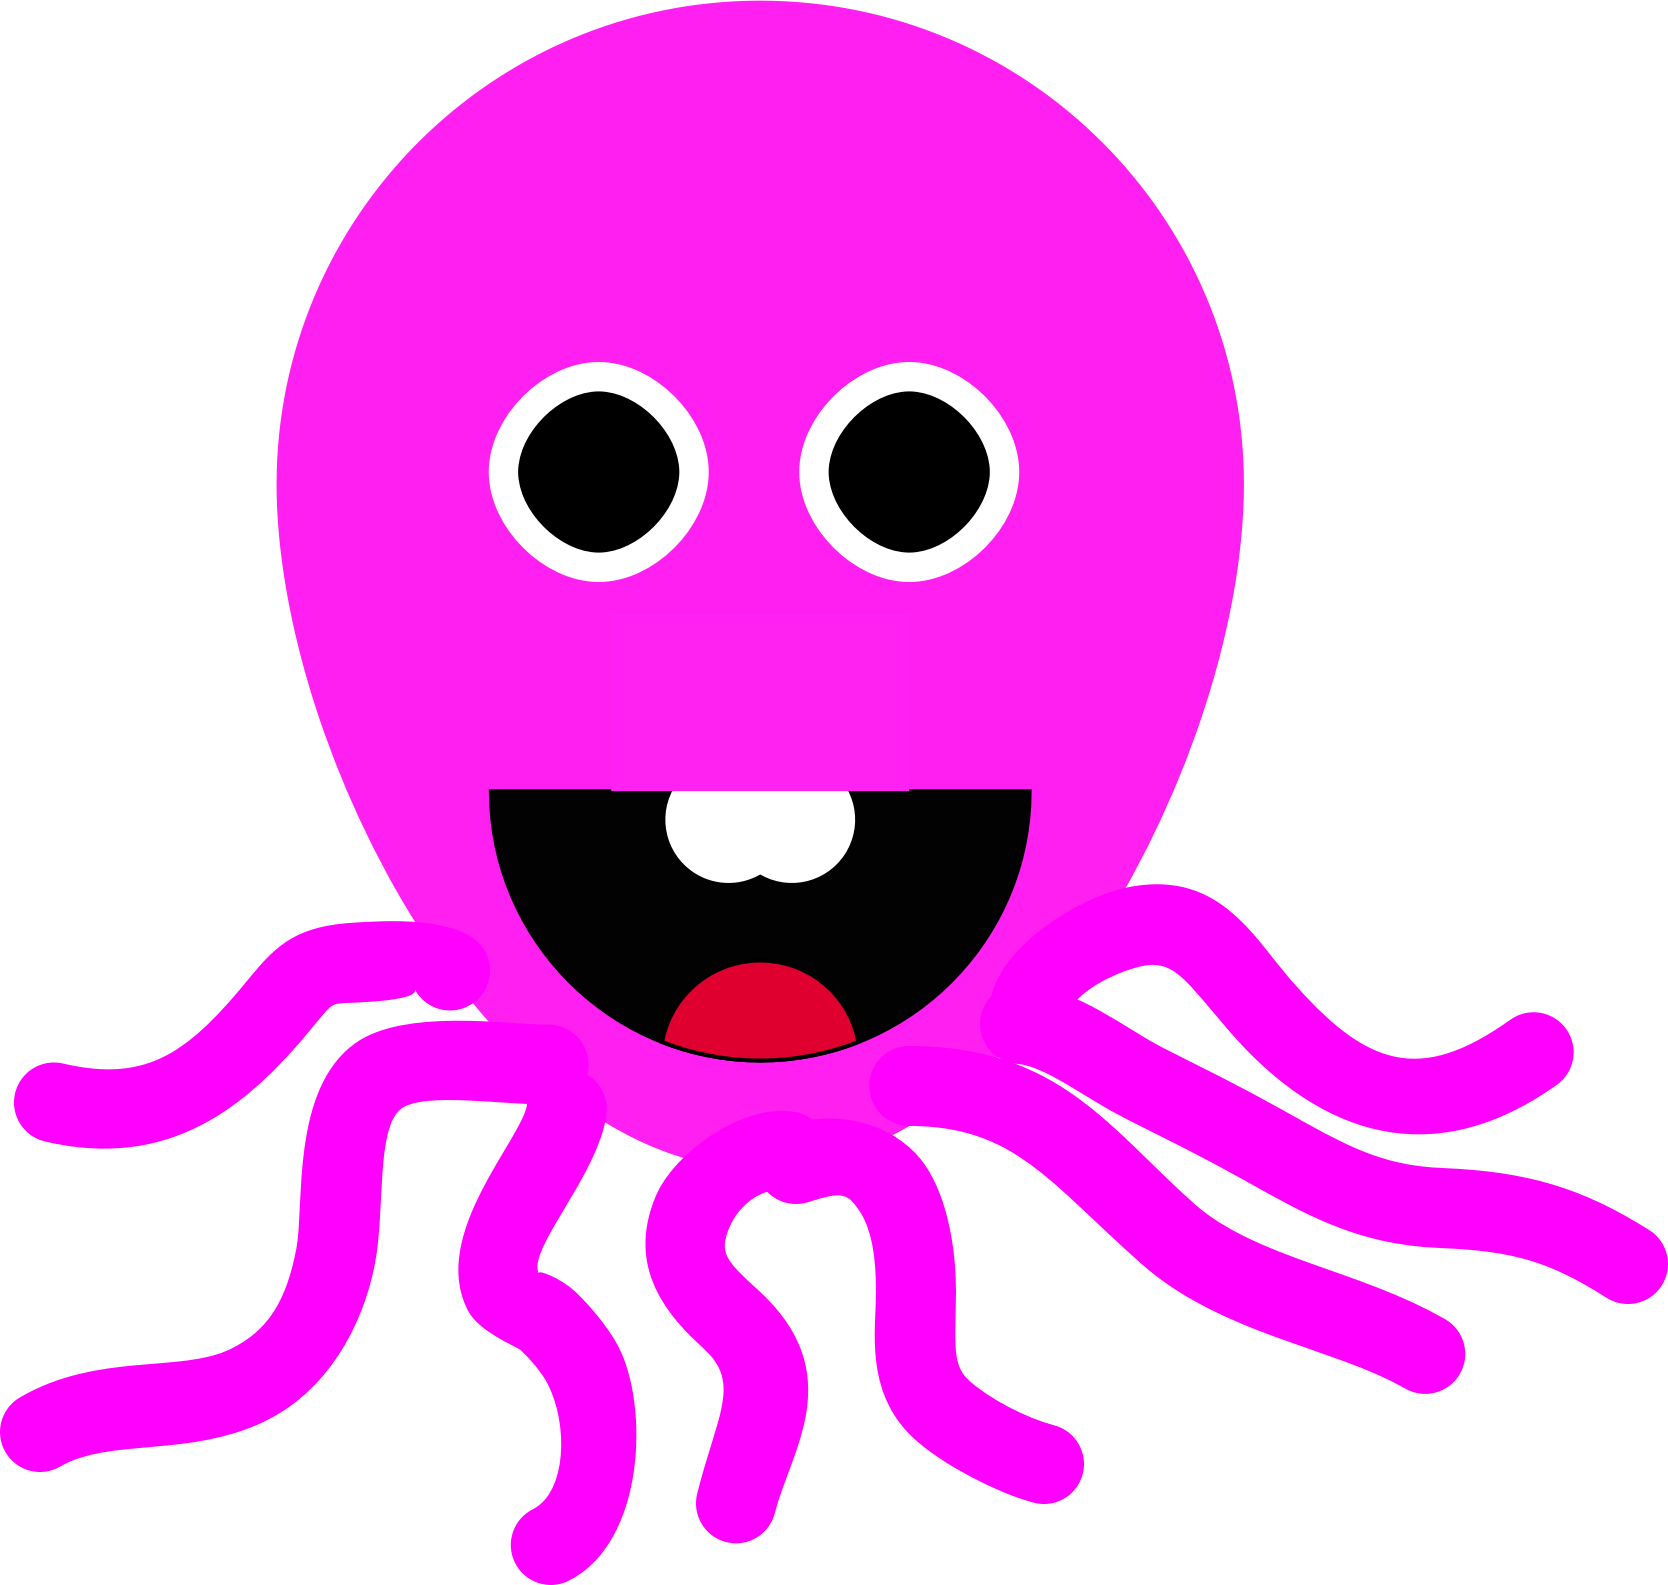 octopus clipart vector pack - photo #32